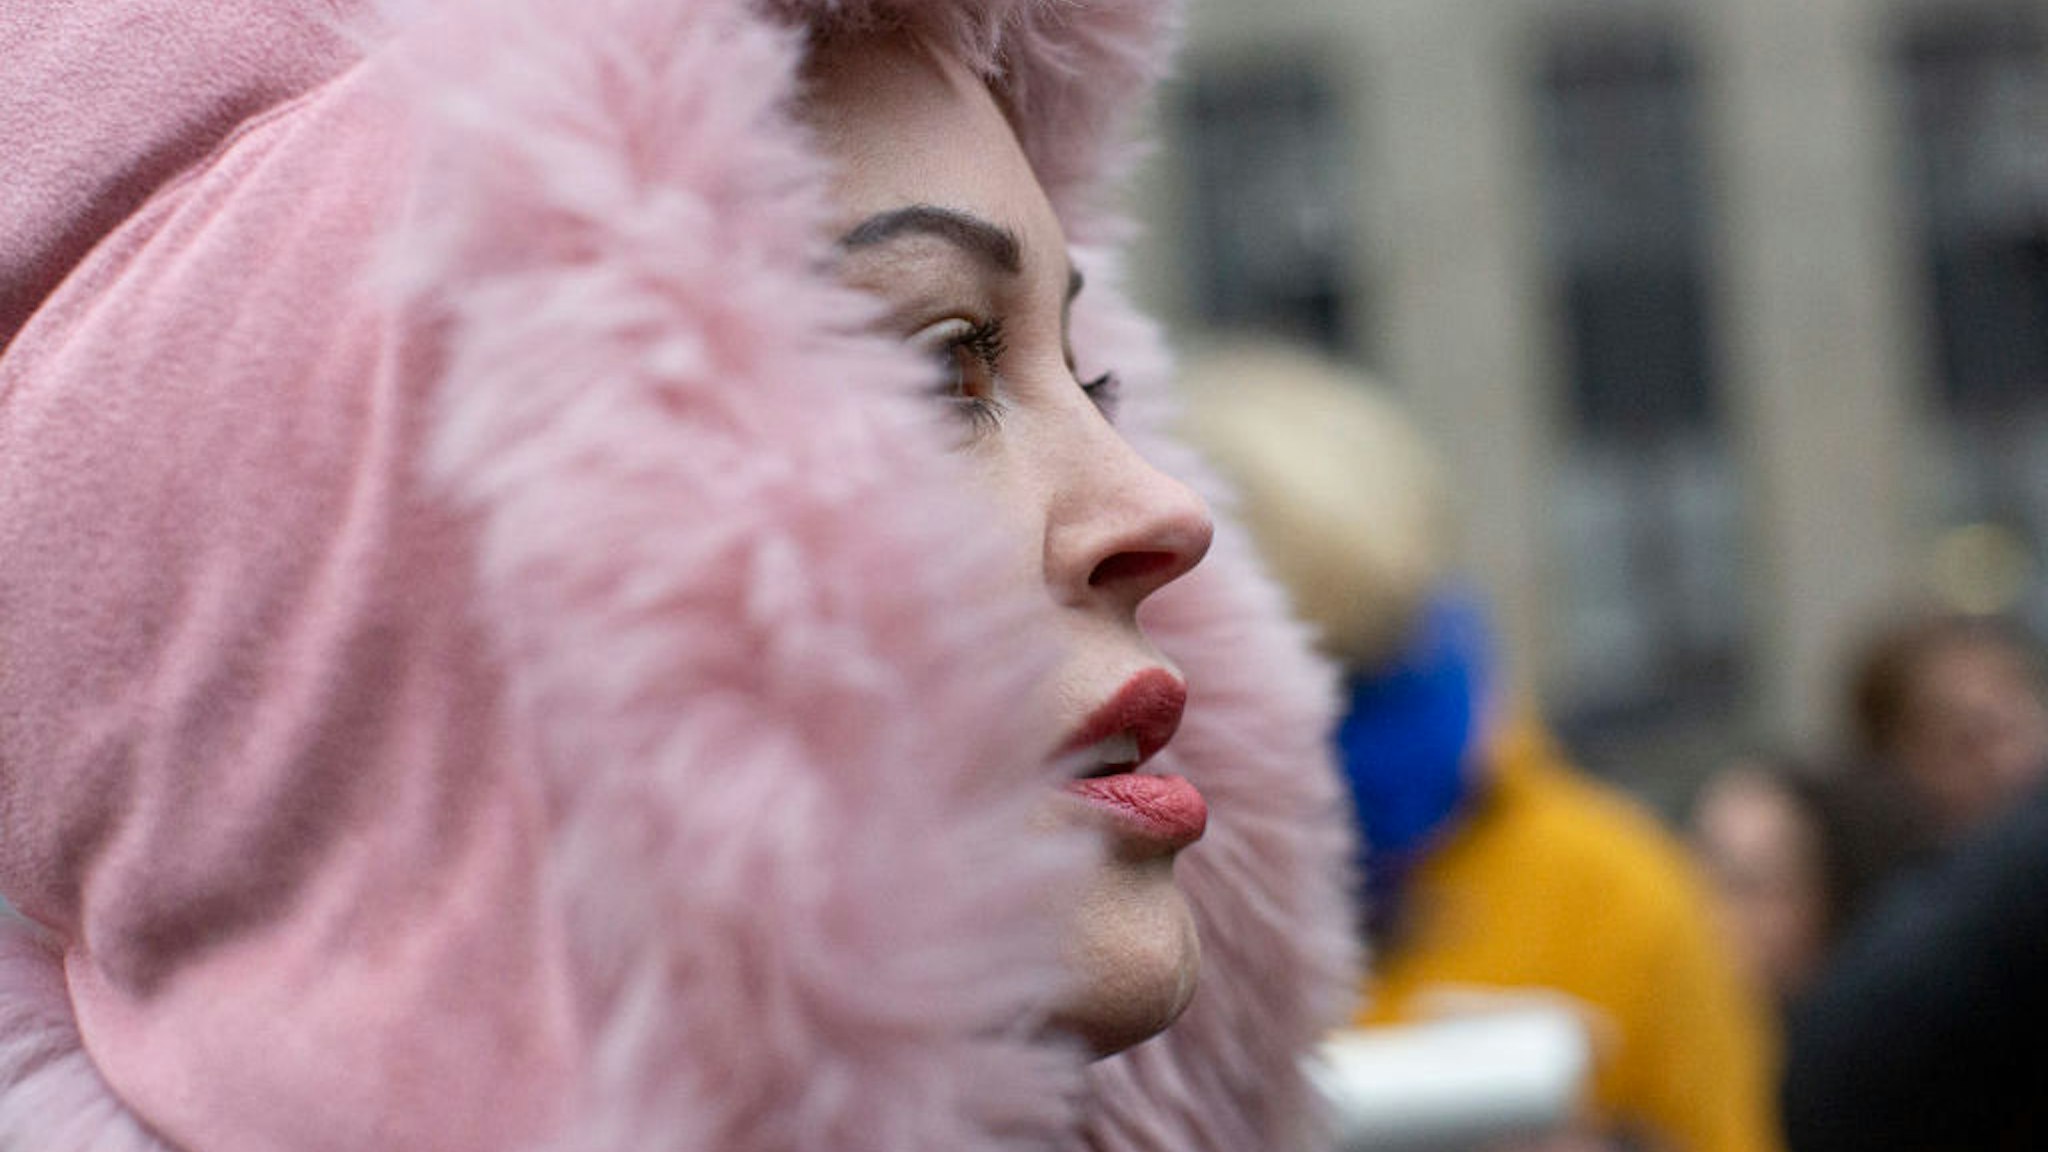 Actress Rose McGowan, who has accused Harvey Weinstein of raping her, attends a press conference outside the court on January 6, 2020 in New York City. Weinstein, a movie producer whose alleged sexual misconduct helped spark the #MeToo movement, pleaded not-guilty on five counts of rape and sexual assault against two unnamed women and faces a possible life sentence in prison. (Photo by Kena Betancur/Getty Images)